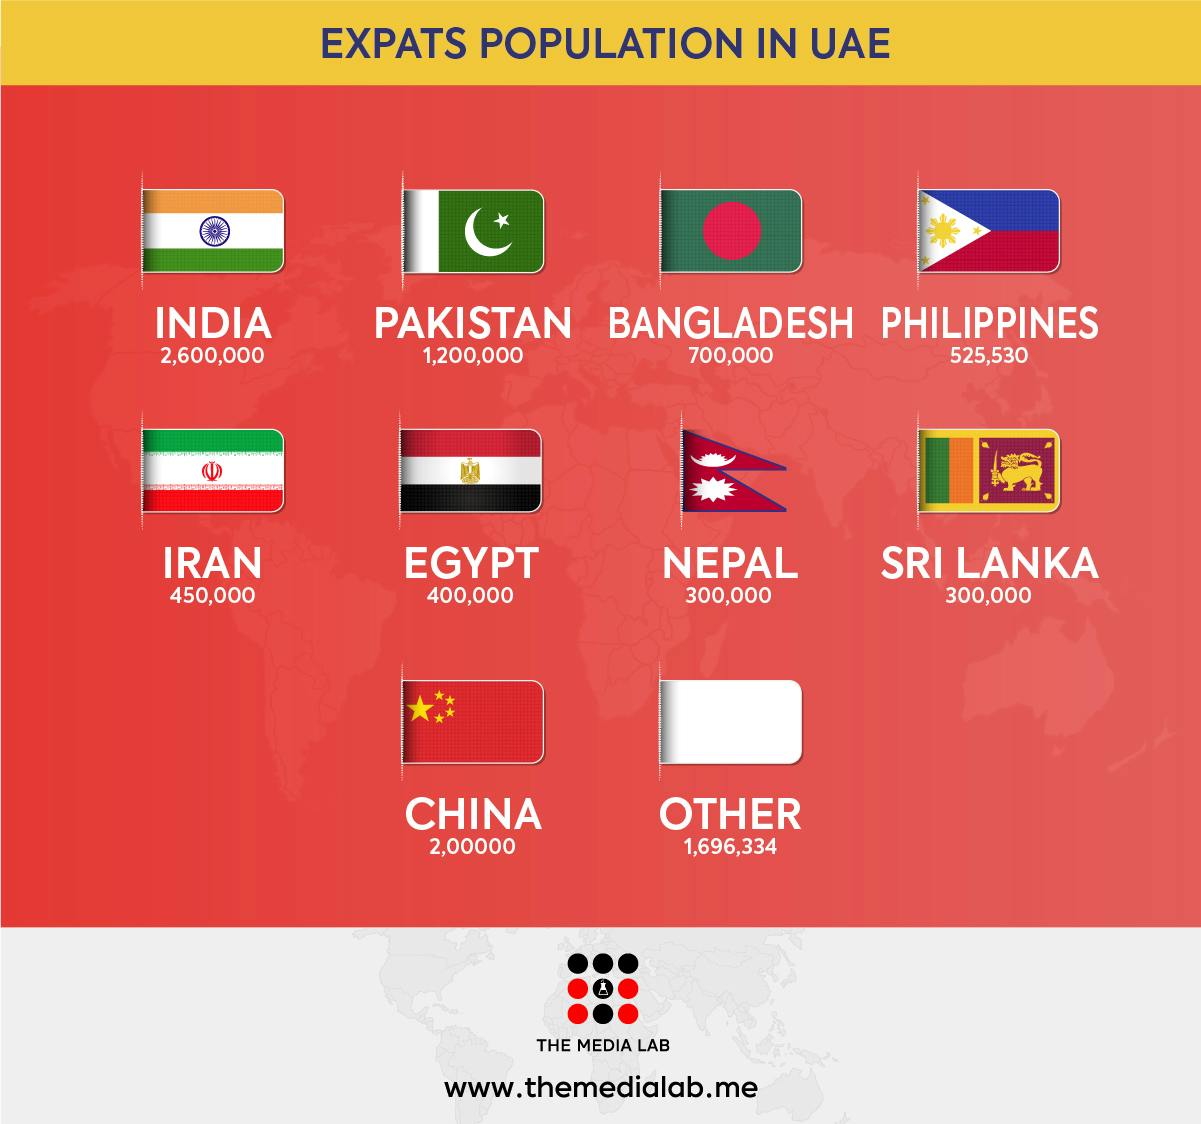 Expats population in UAE 2019